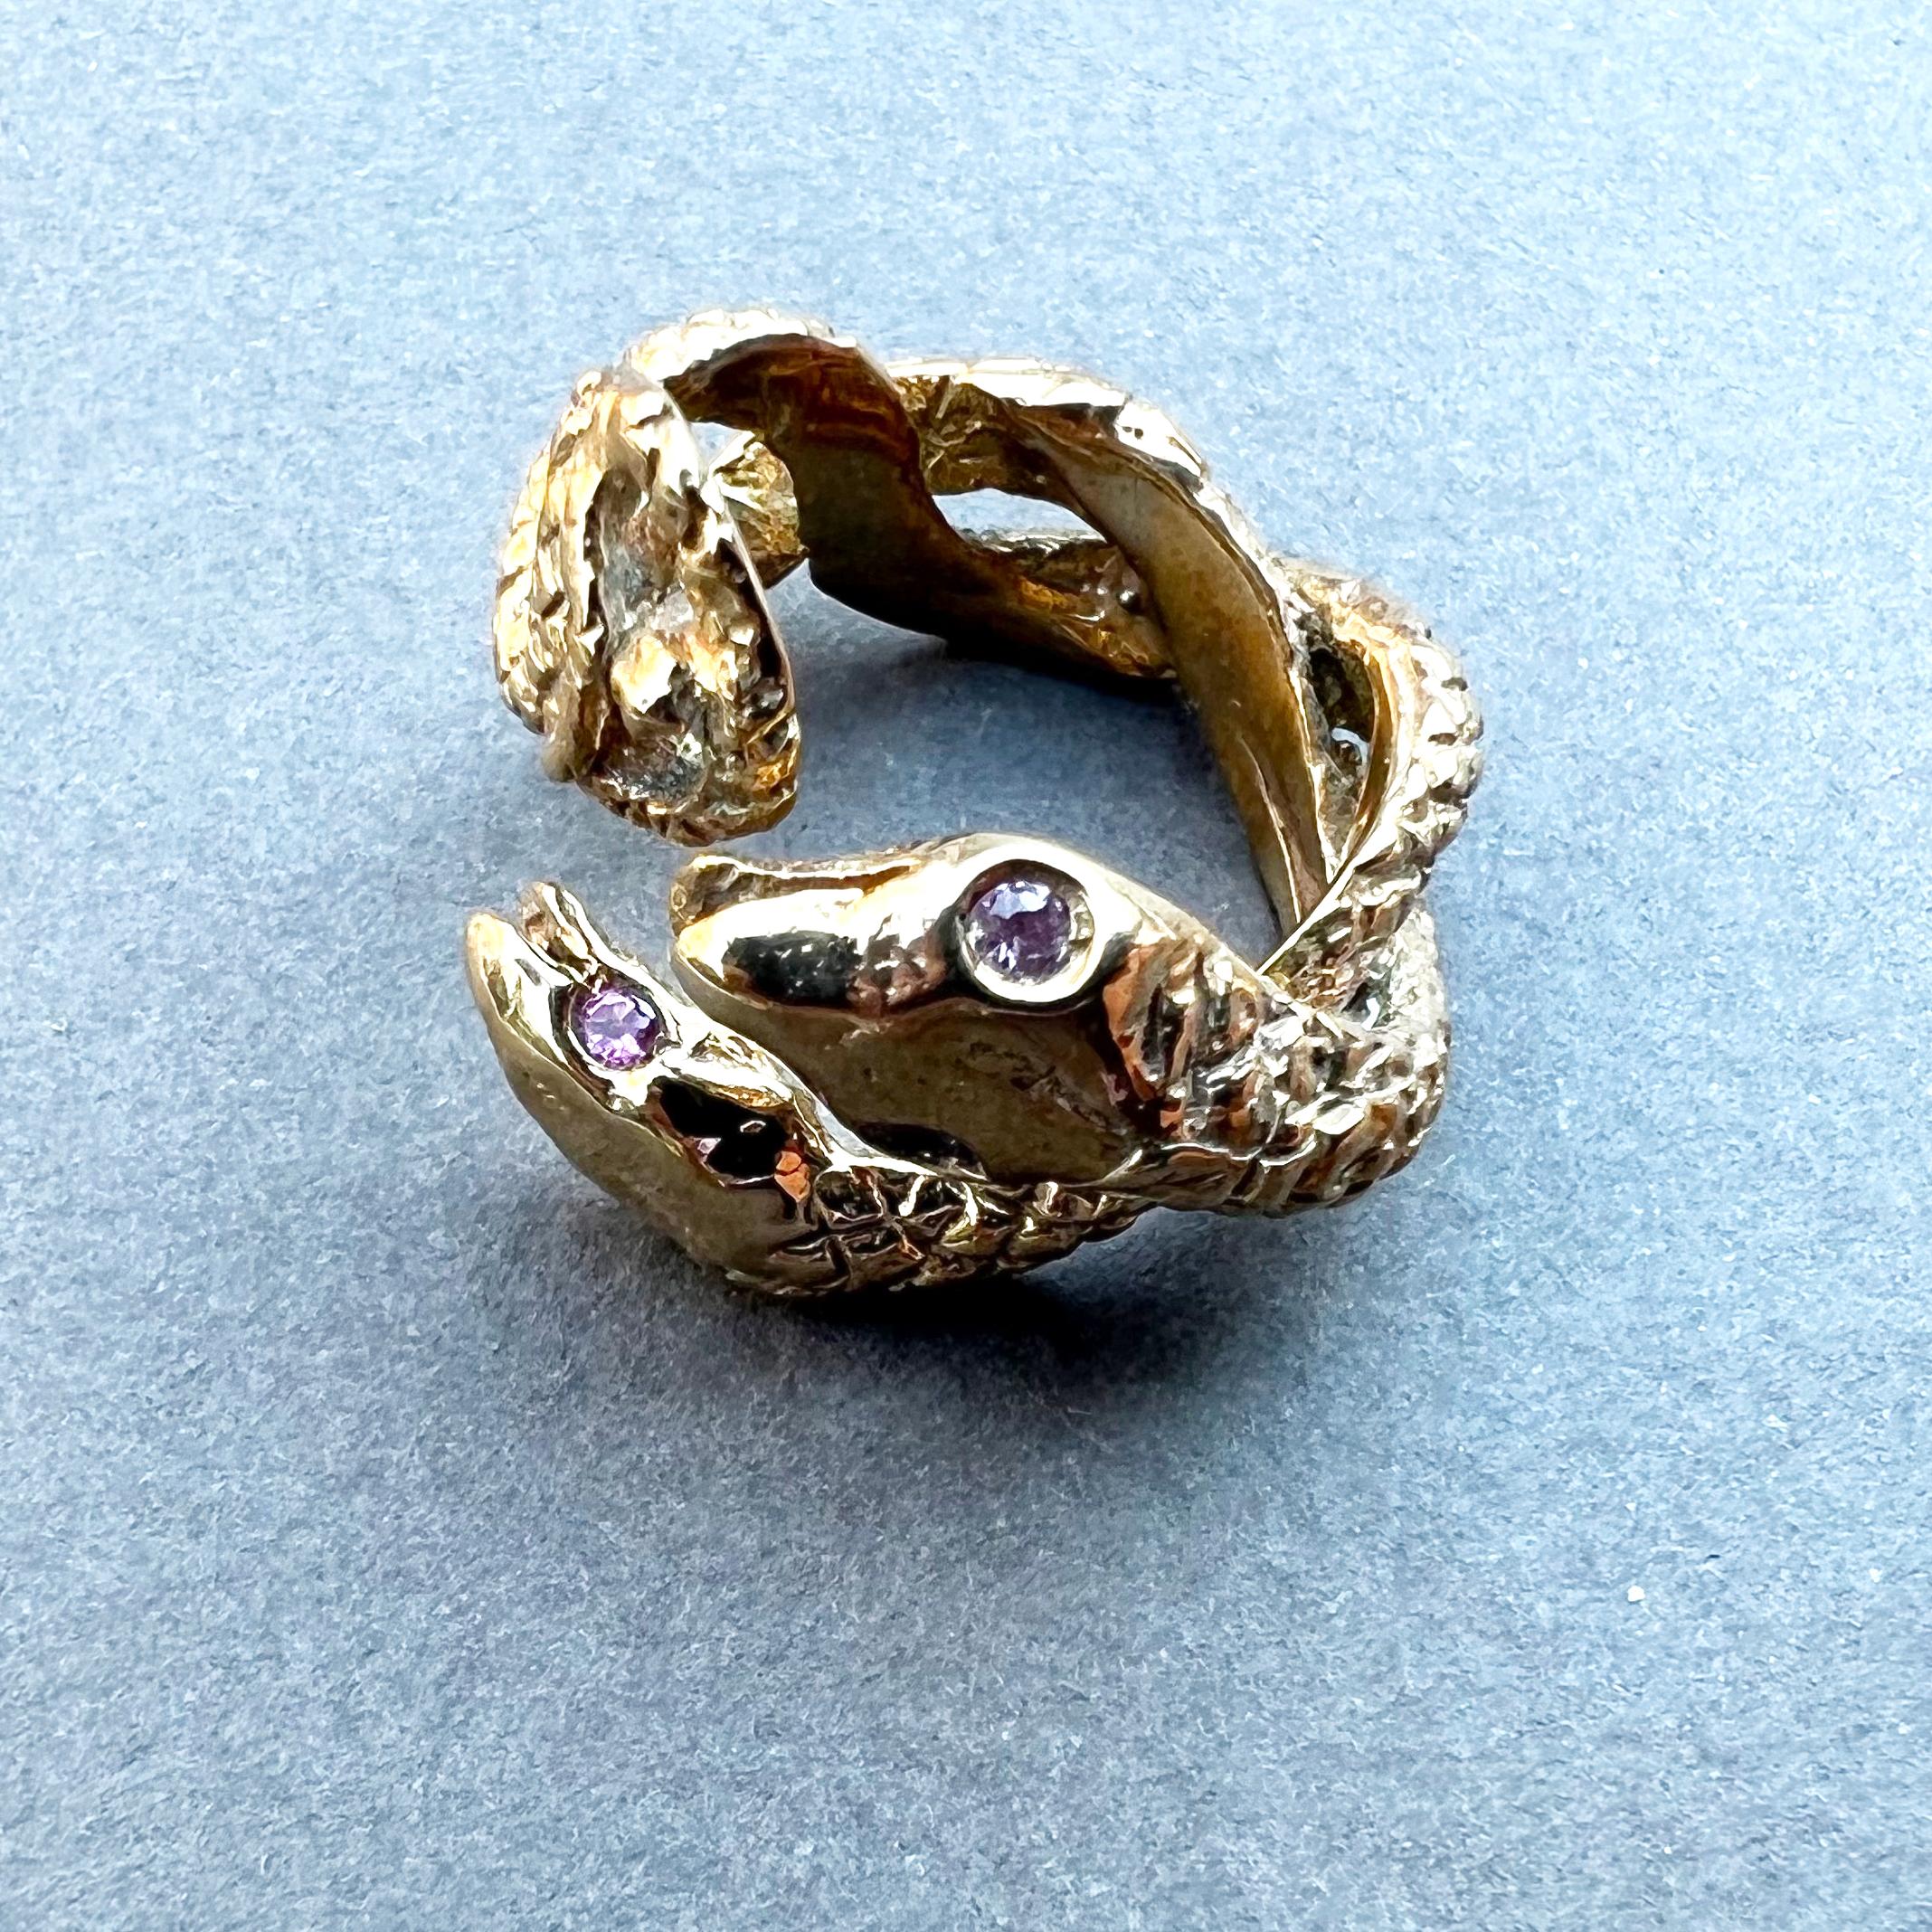 Animal jewelry Pink Sapphire Snake Ring Bronze Cocktail Ring J Dauphin In New Condition For Sale In Los Angeles, CA